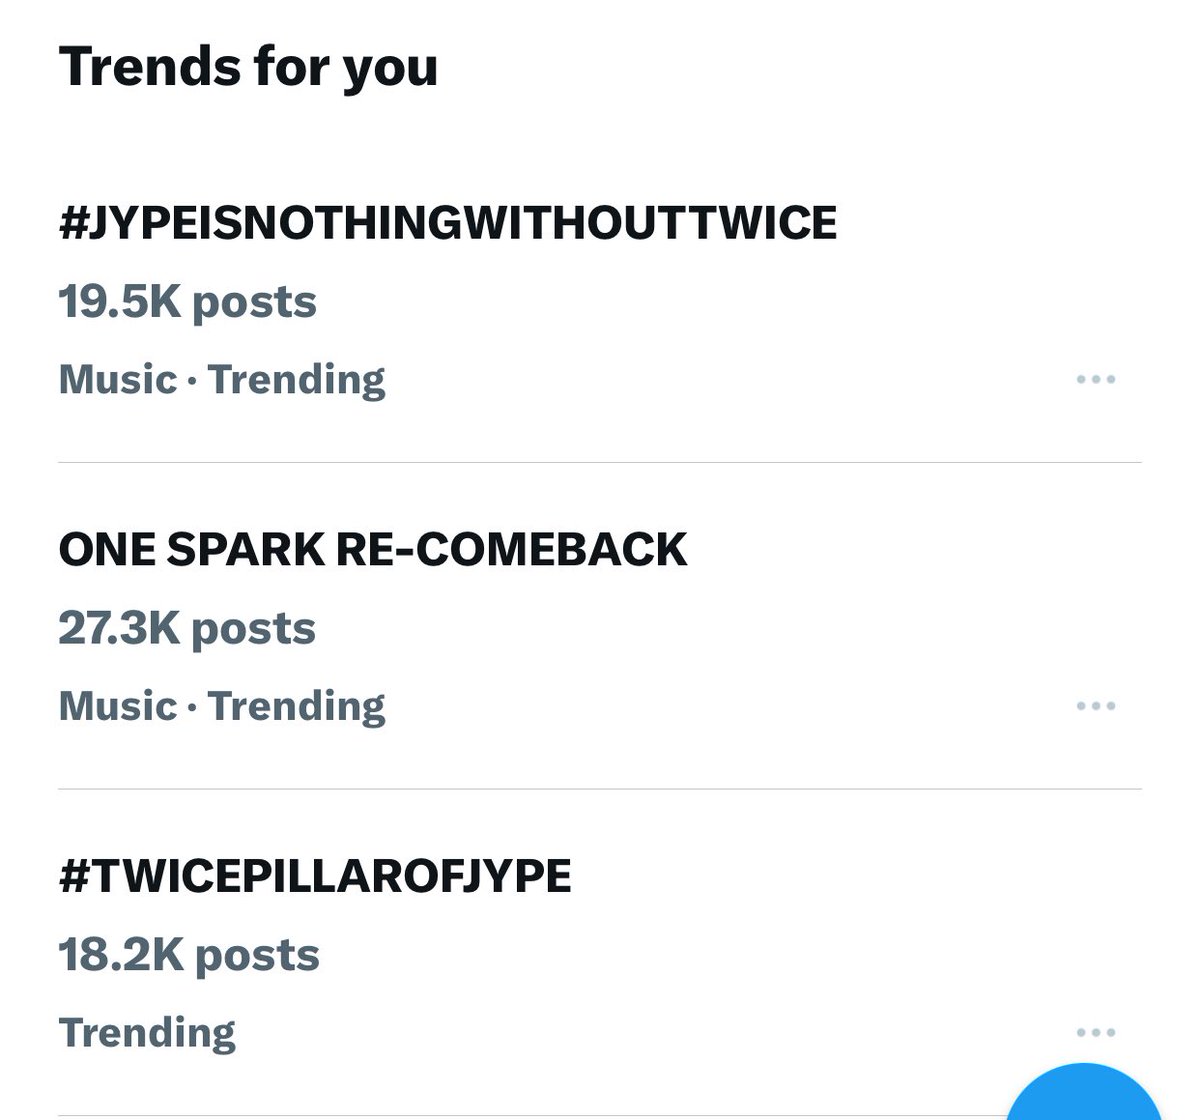 BRO WHATS GOING ON??? 

ONE SPARK RE-COMEBACK
2024.05.09 2PM KST/OAM EST #TWICEPILLAROFJYPE
#JYPEISNOTHINGWITHOUTTWICE
#SAVETWICEFROMJYPE